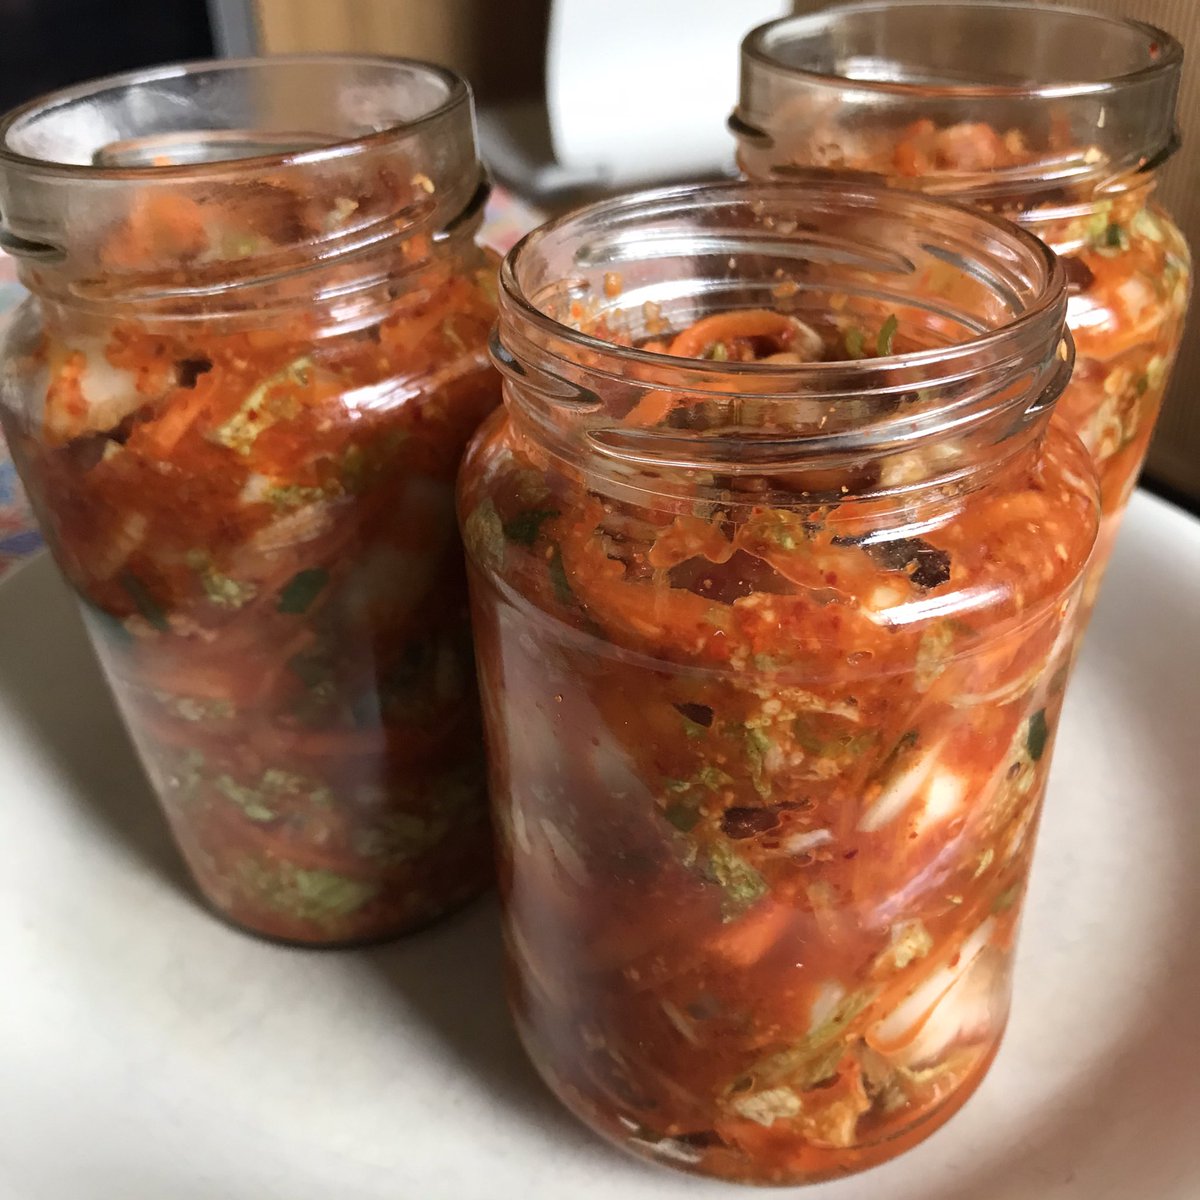 My homemade #kimchi. In 3 weeks it will be full of #beneficialbacteria and #probiotics to help promote proper gut function and for #immunesupport ready for the winter ahead. #prebiotics #gutsupport #healthygut #readyforwinter #heathylifestyle #wellness #healthylife #nutrition